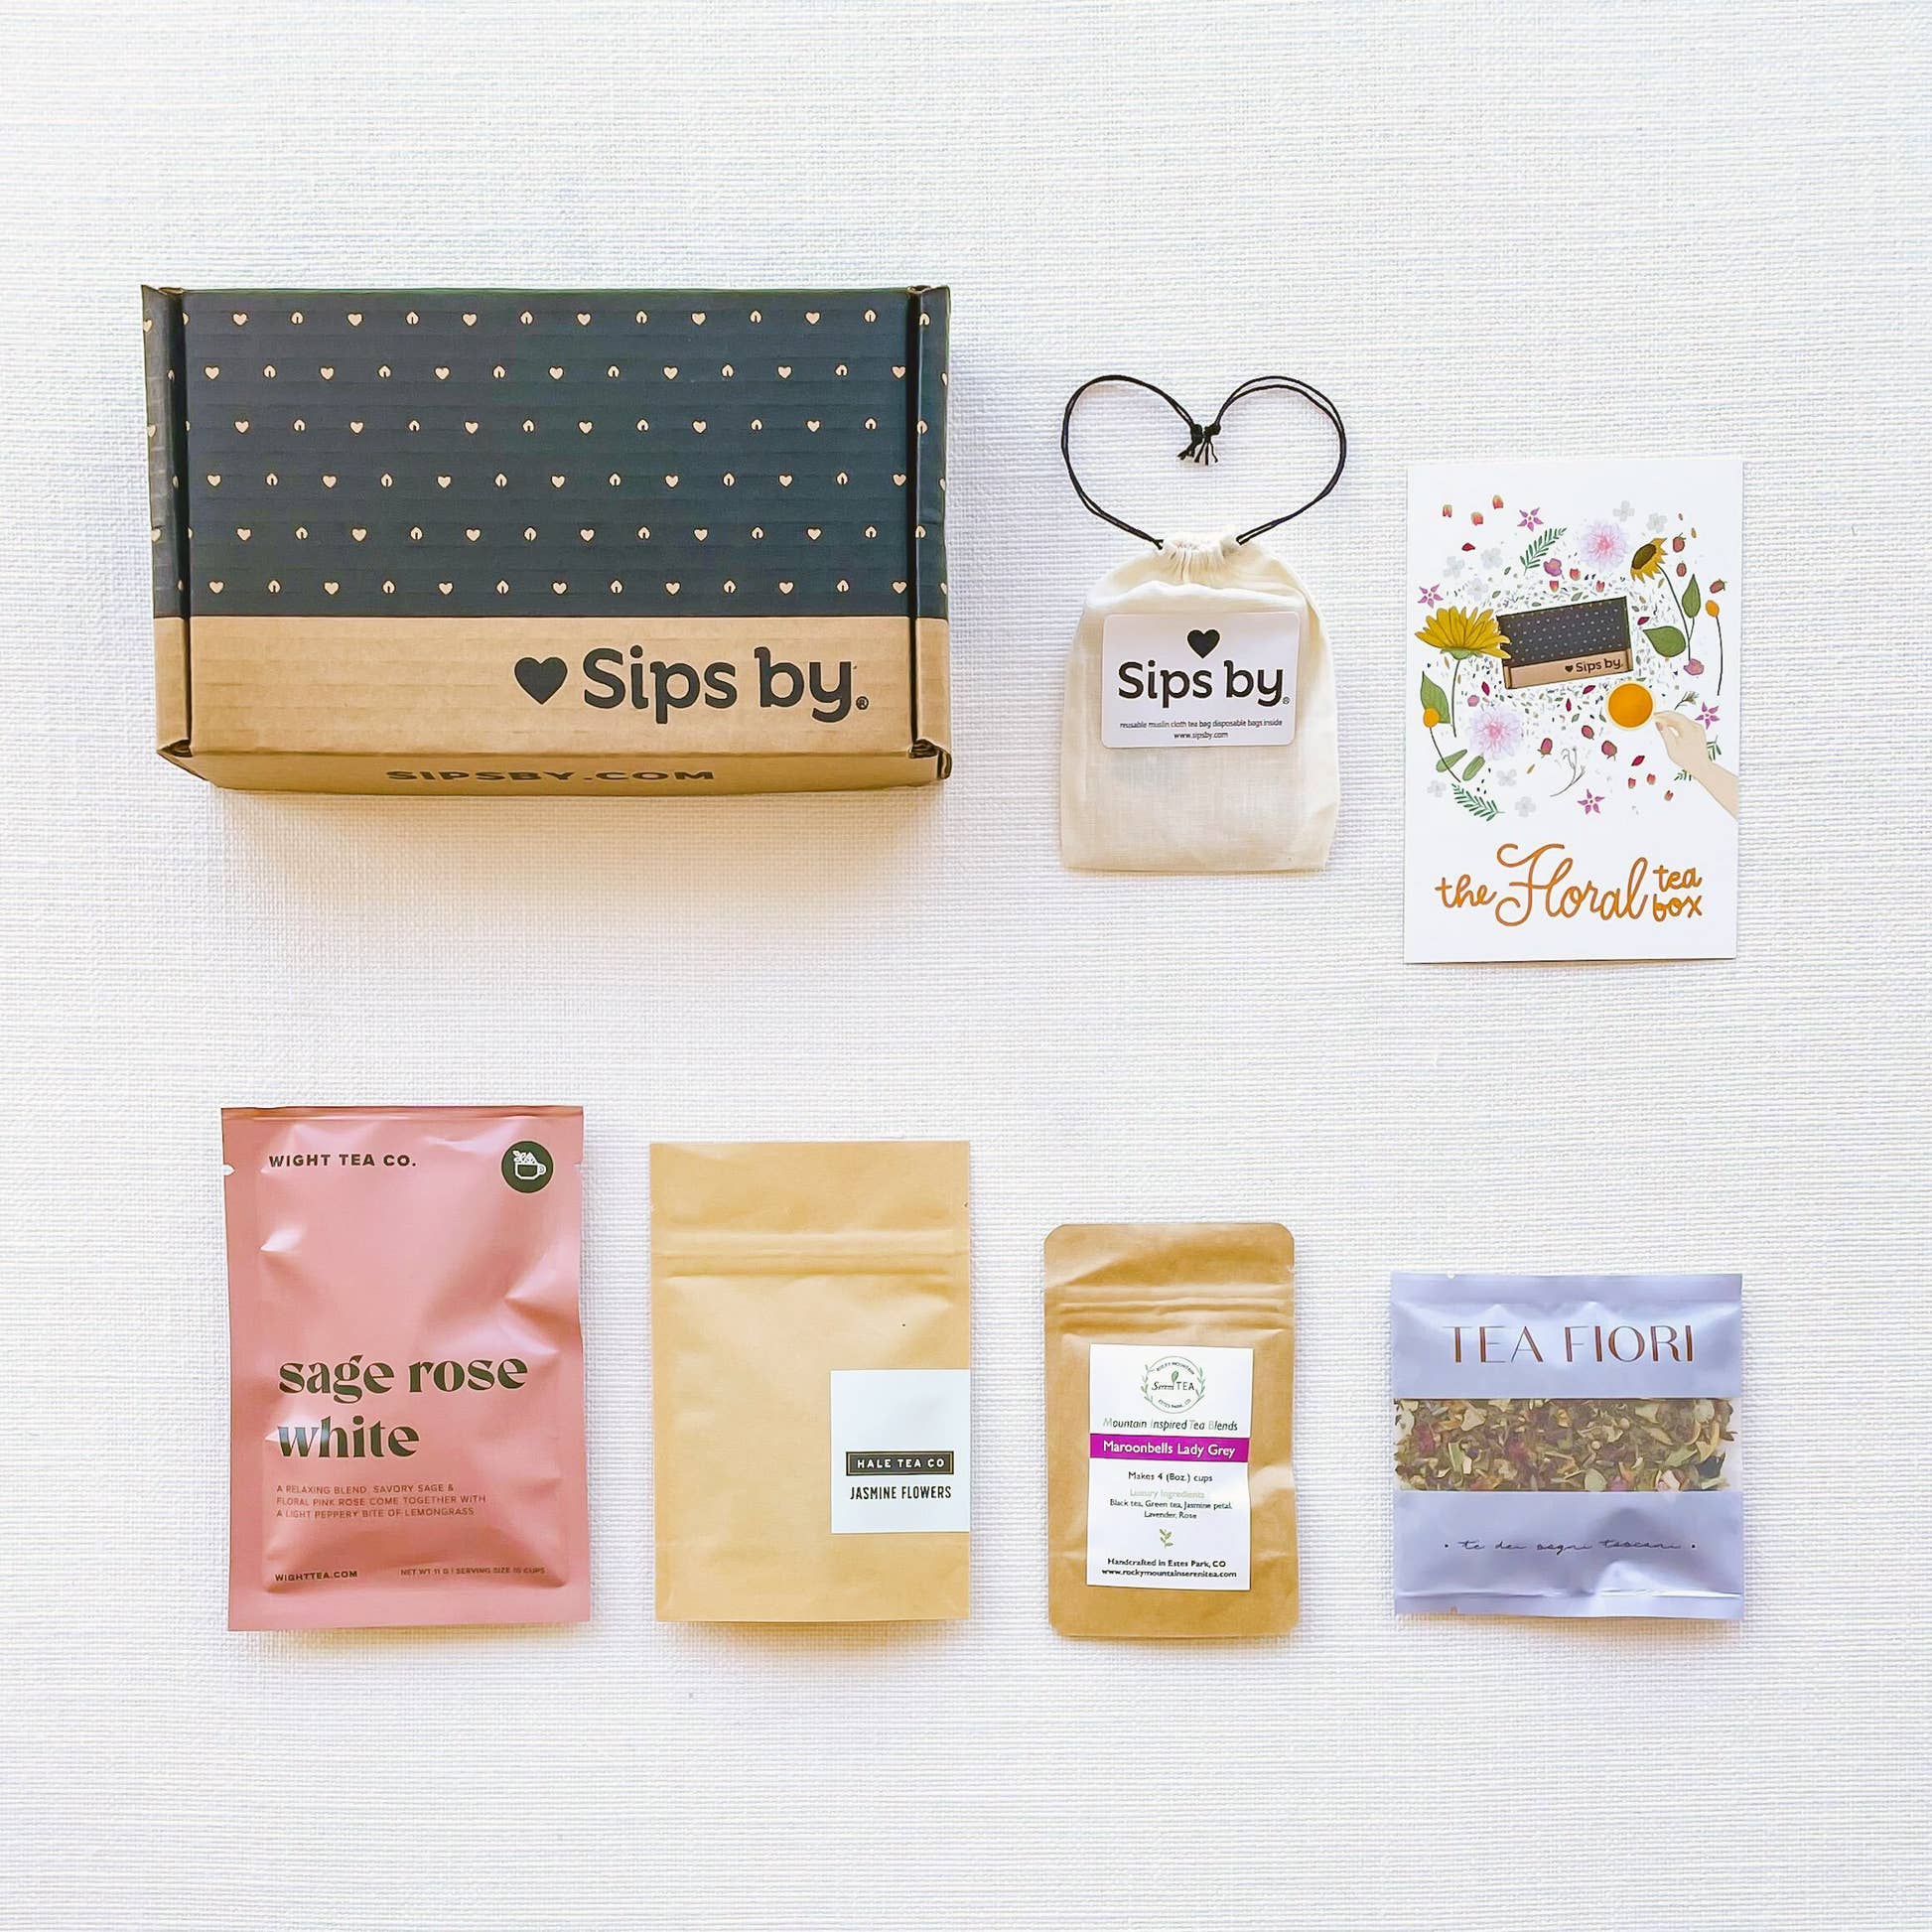 Sips by Box with four floral tea samples from Wight Tea Co, Tea Fiori, Hale Tea Co, and Rocky Mountain SereniTEA with disposable Sips by tea filters and illustrated floral tea box postcard